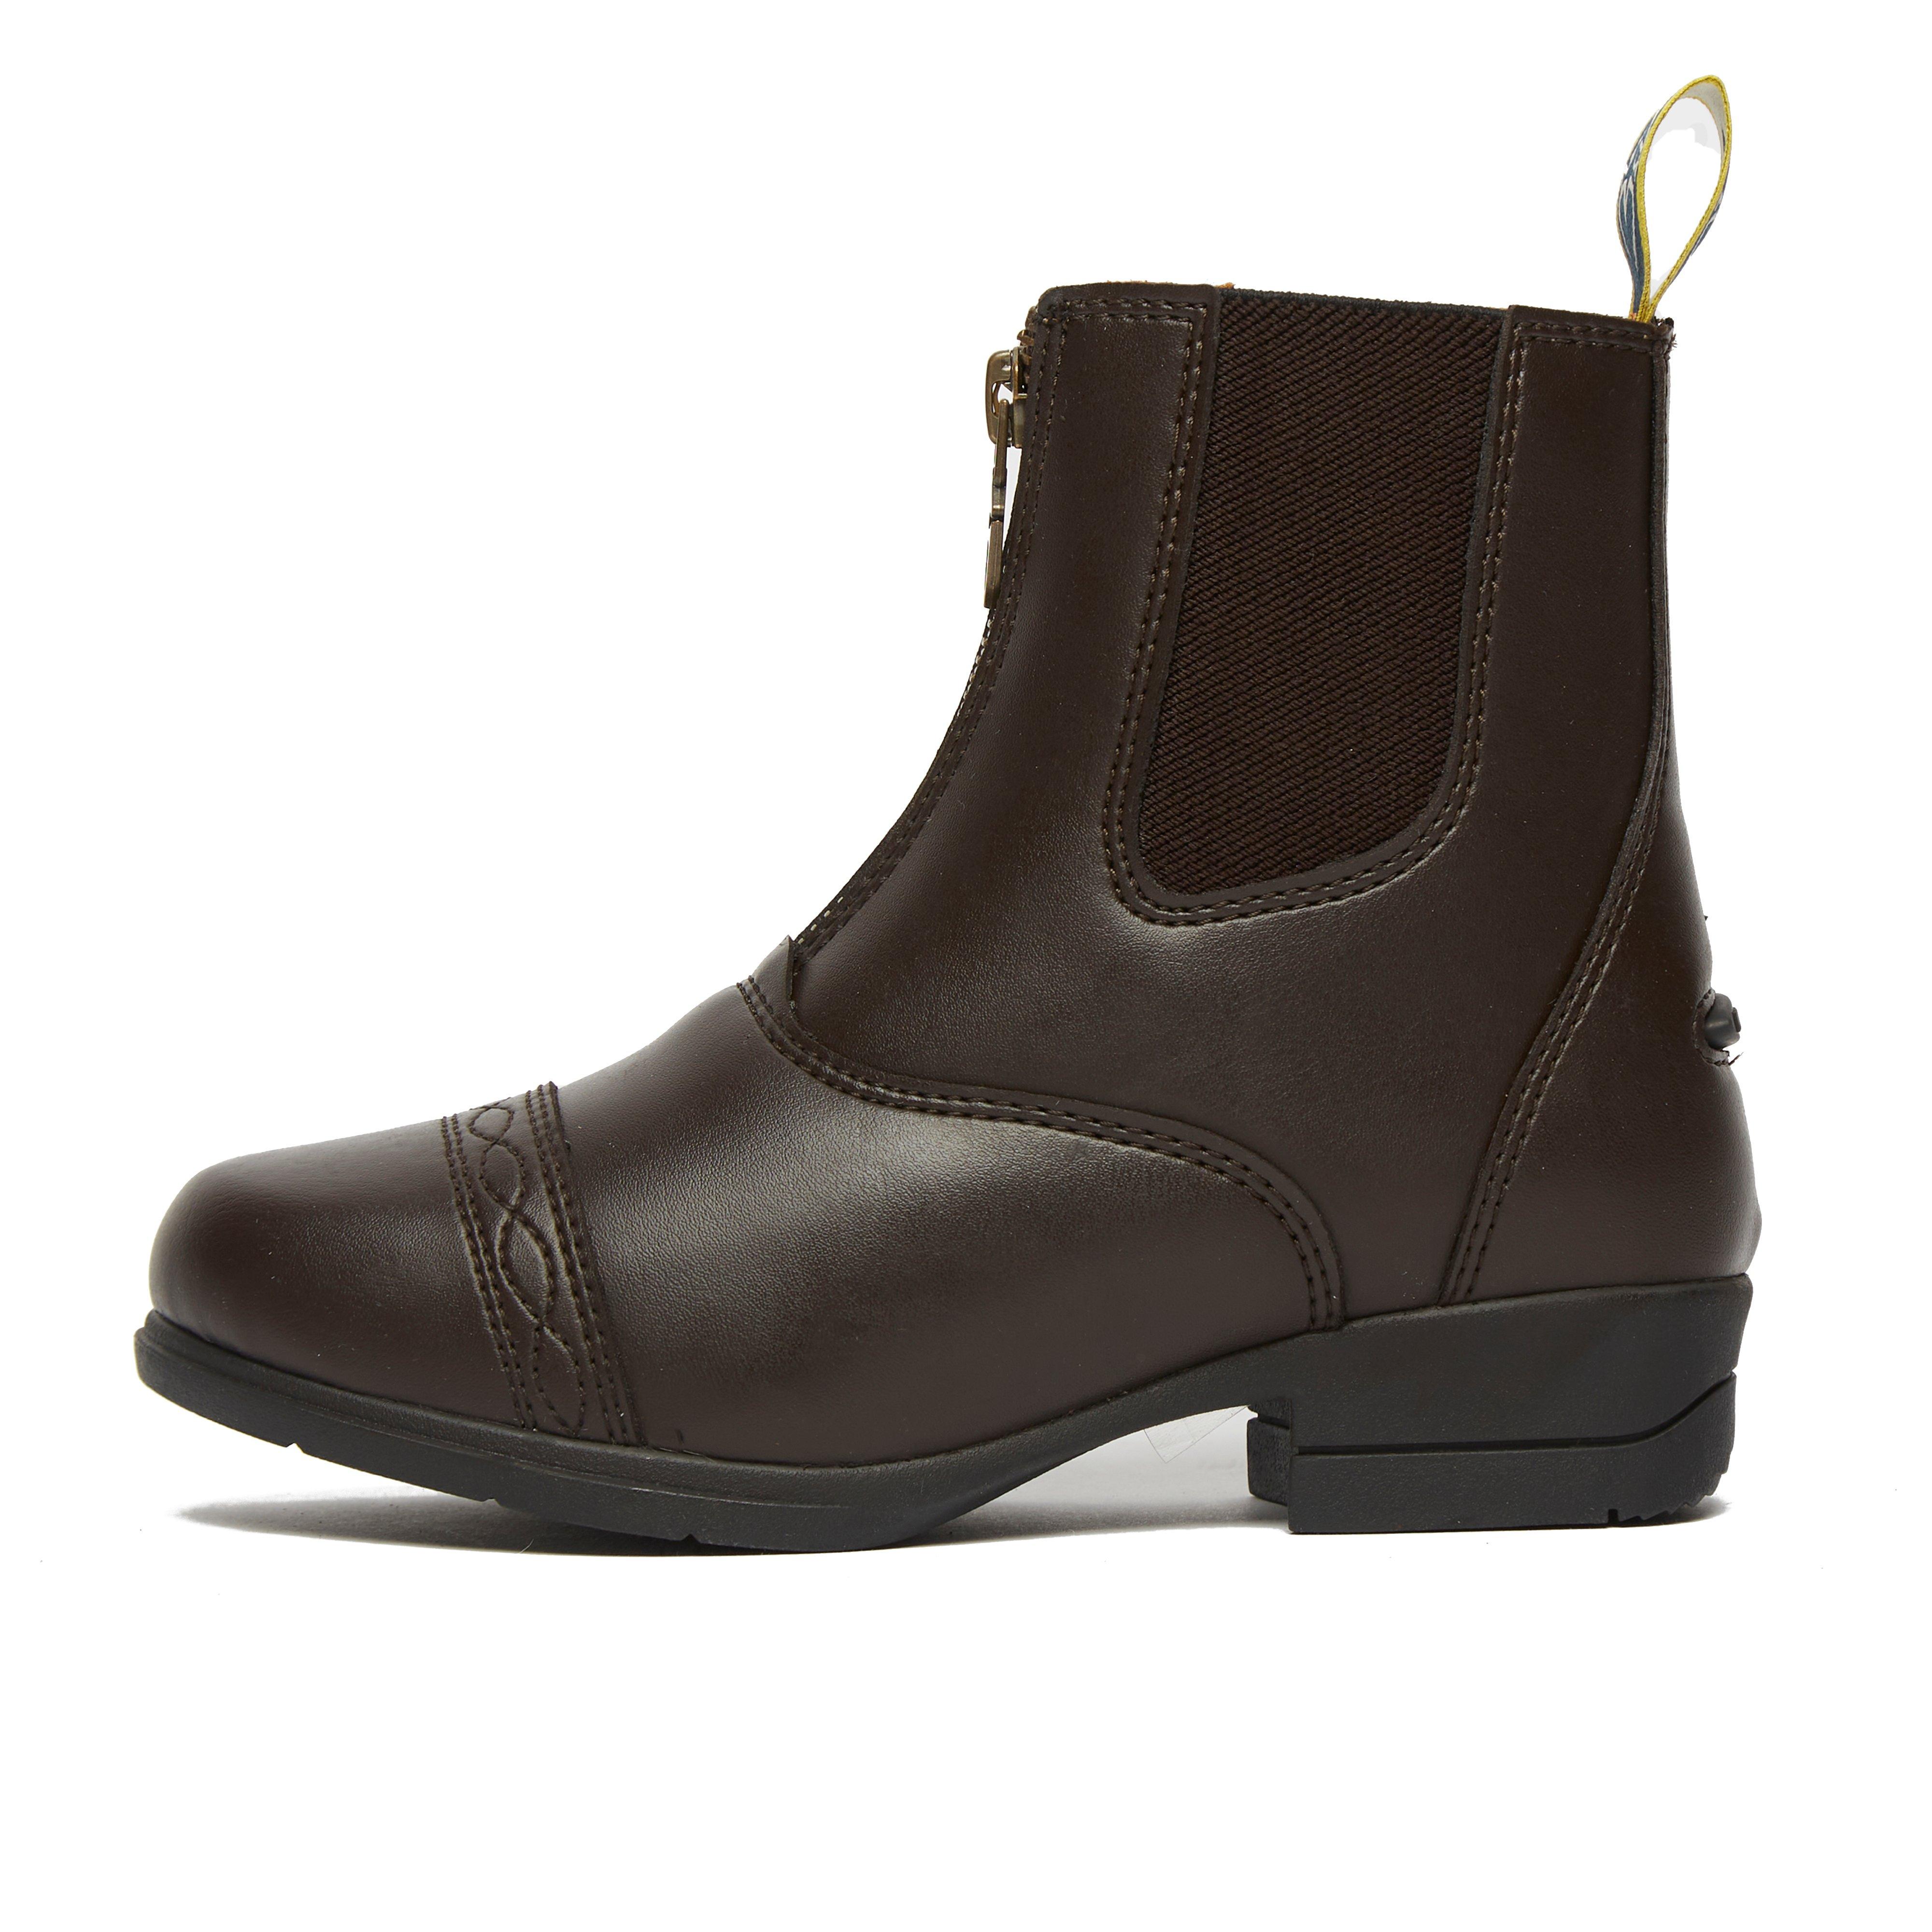 Childs Clio Paddock Boots Brown